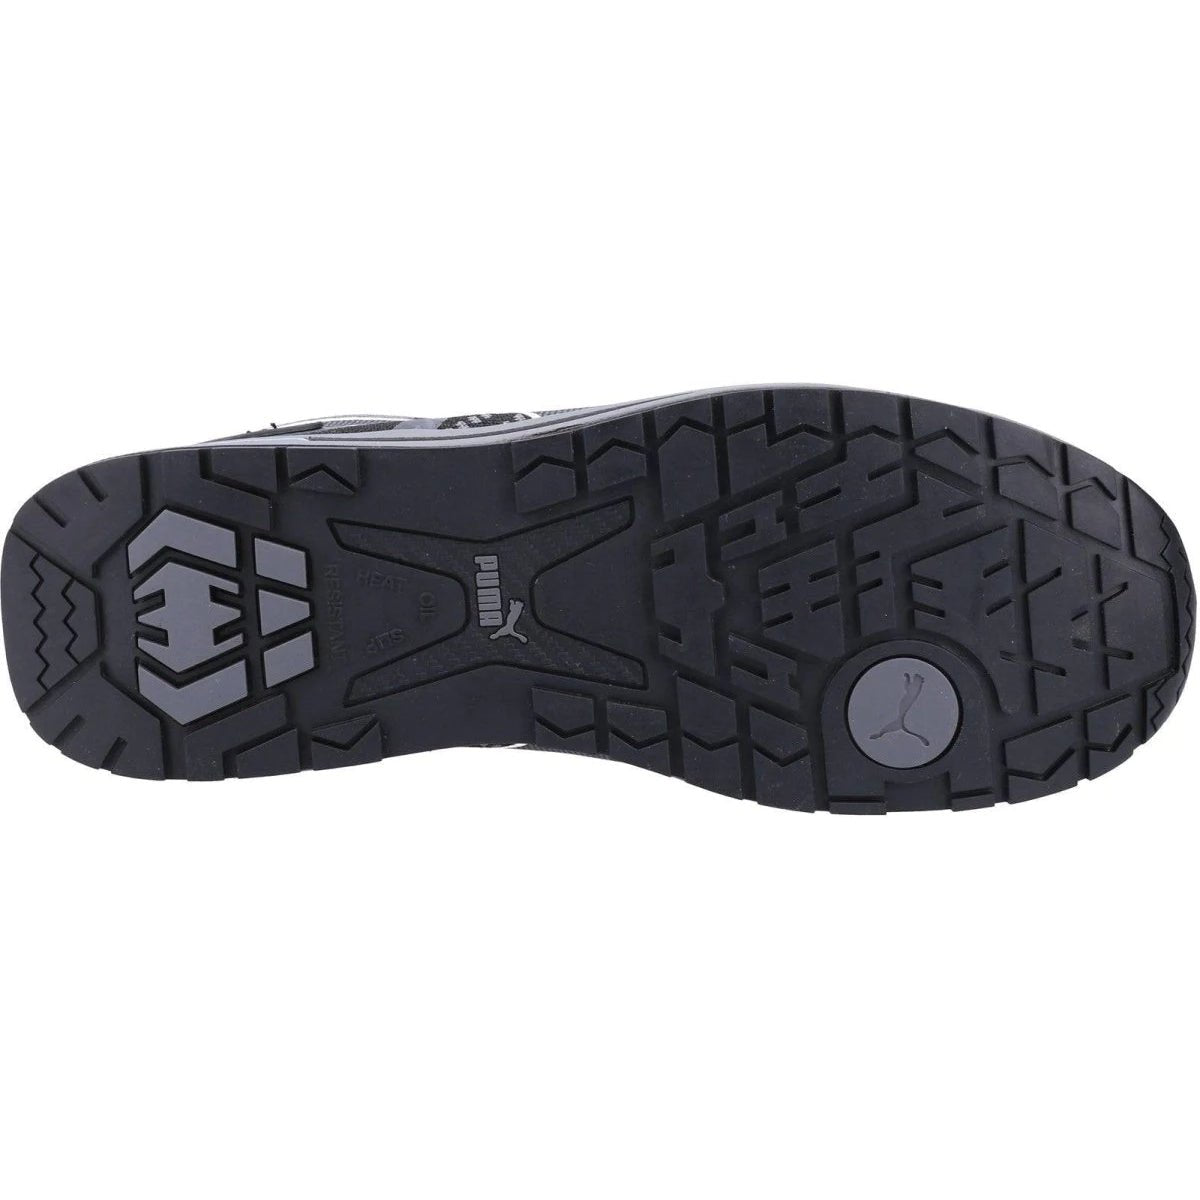 Puma Elevate Knit Low S1P Safety Shoe - Shoe Store Direct